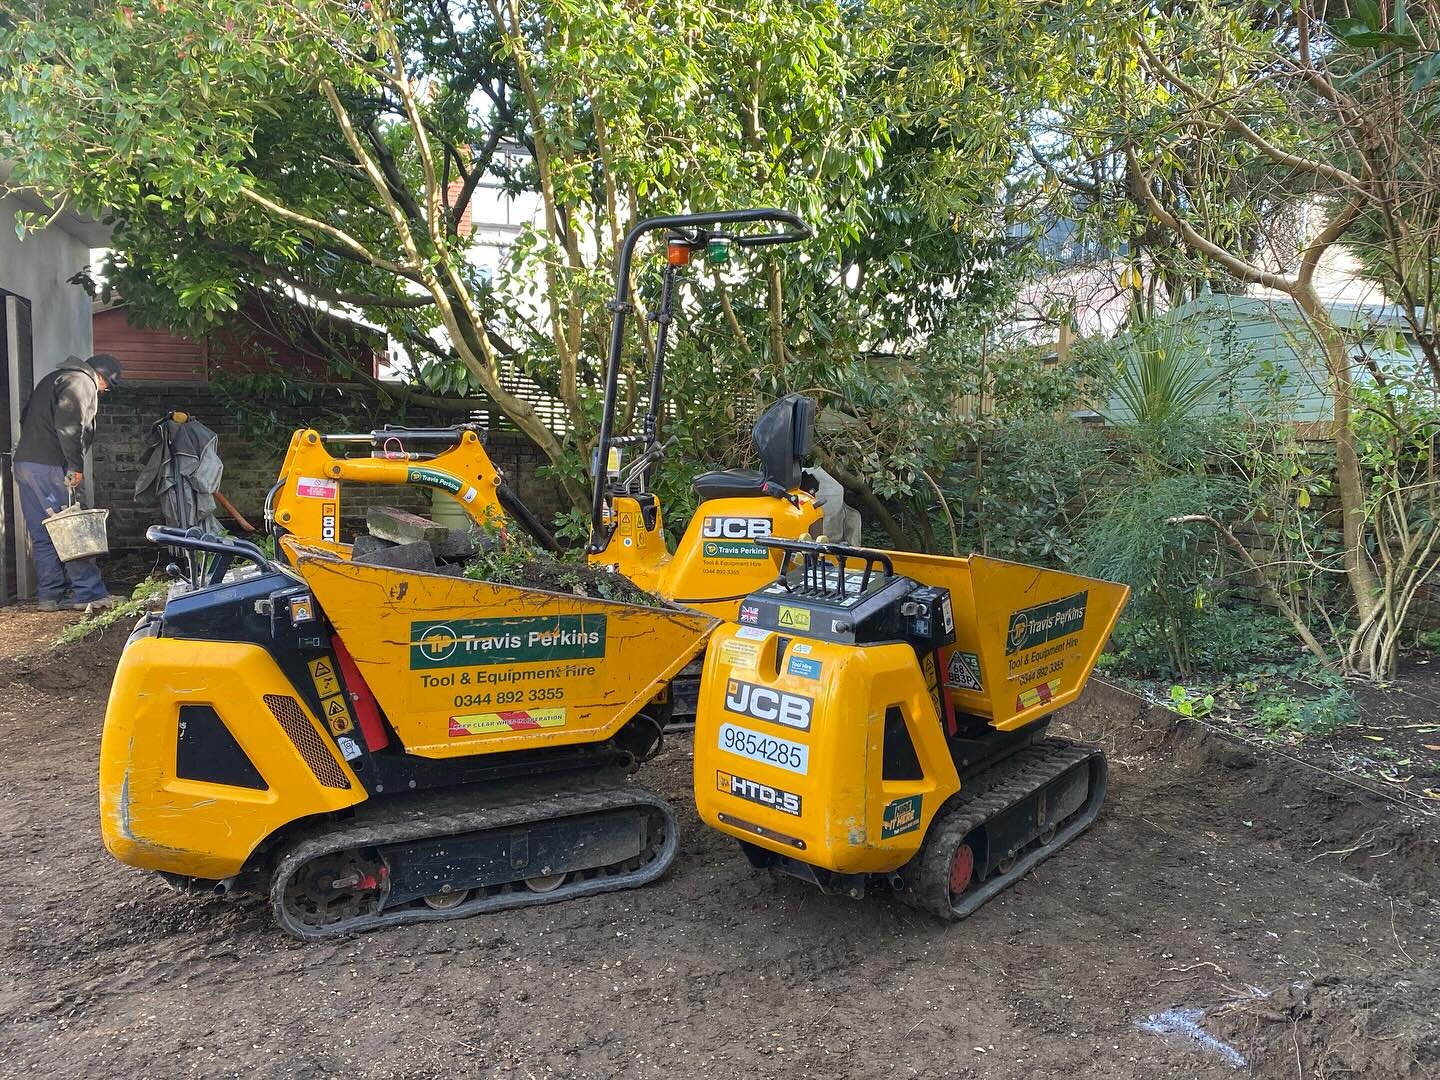 New build started! Exciting time for our clients, and for us!
We are using a lovely soft clay paver with large format porcelain, slatted fencing, a water trough and sensitive lighting. A small city garden will become a cool lush green haven with thre